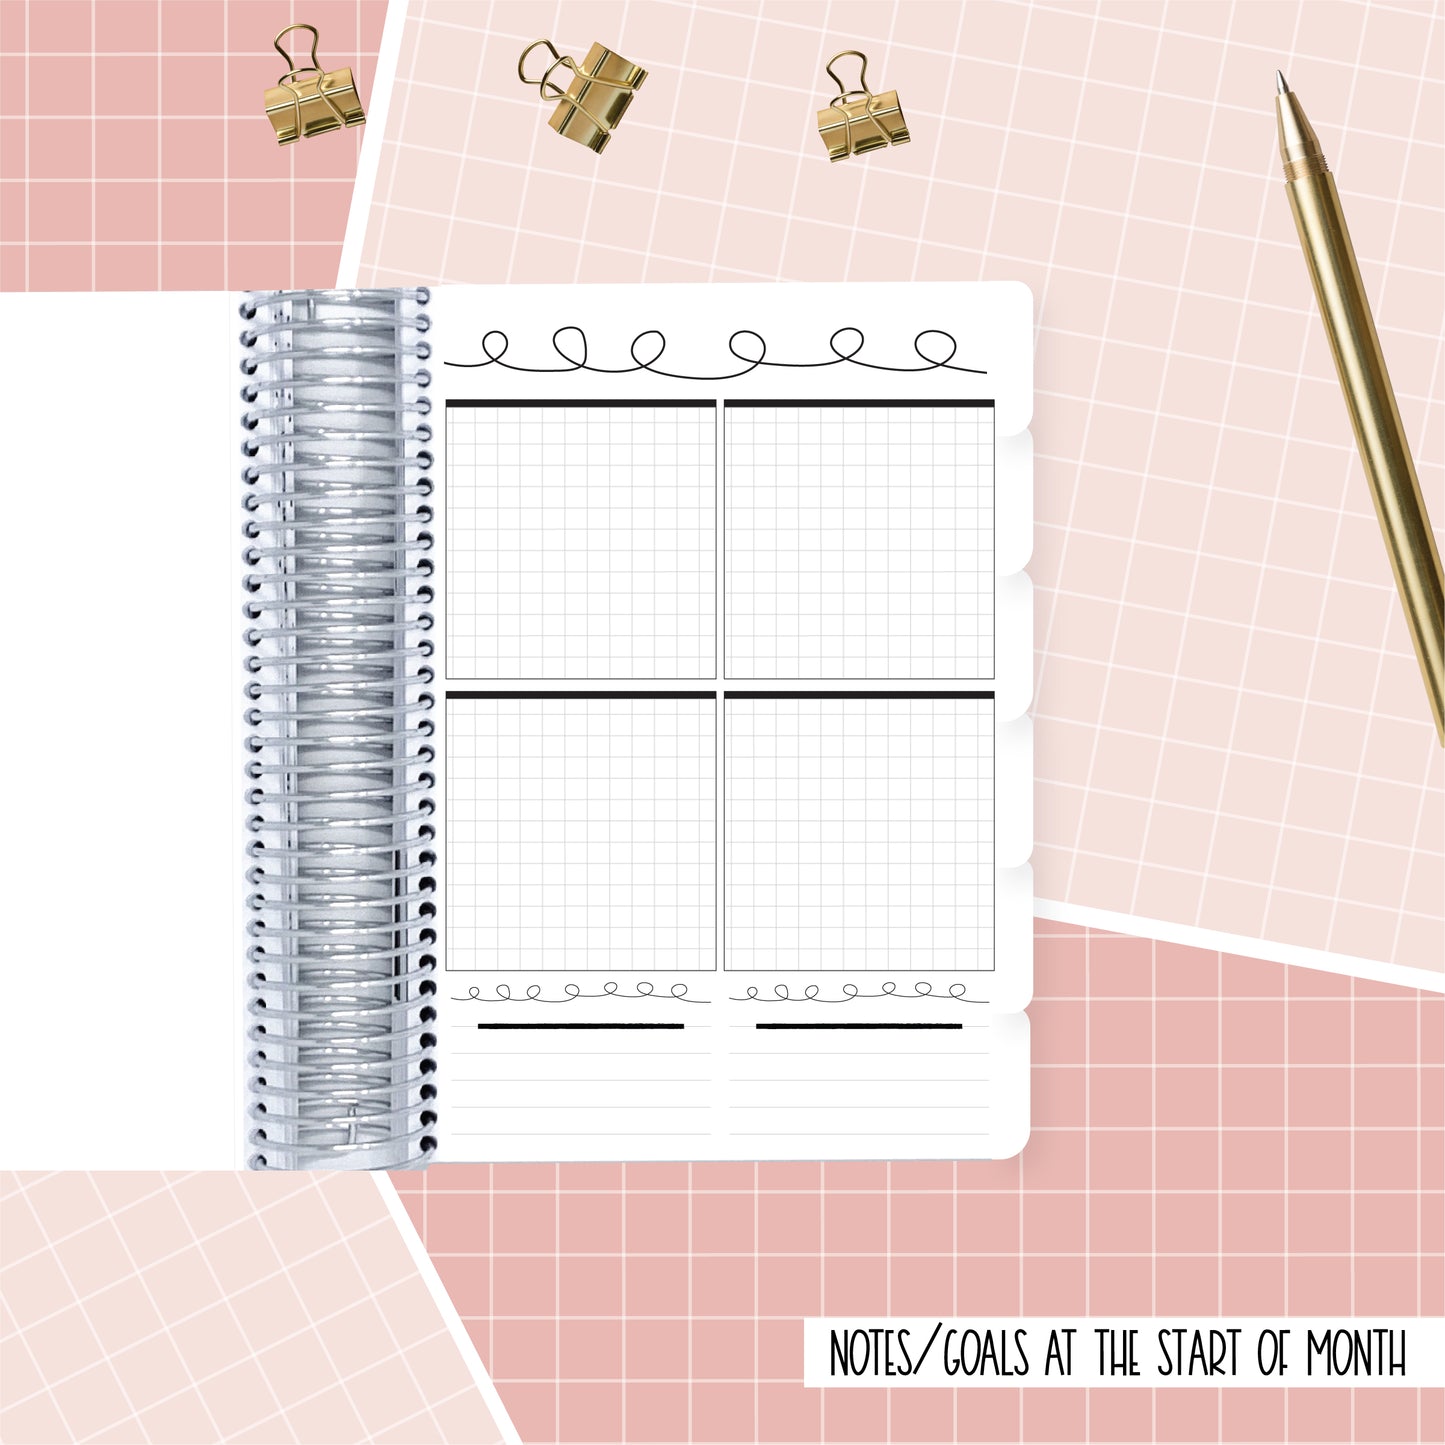 Retro Florals - A5 Horizontal Weekly Planner